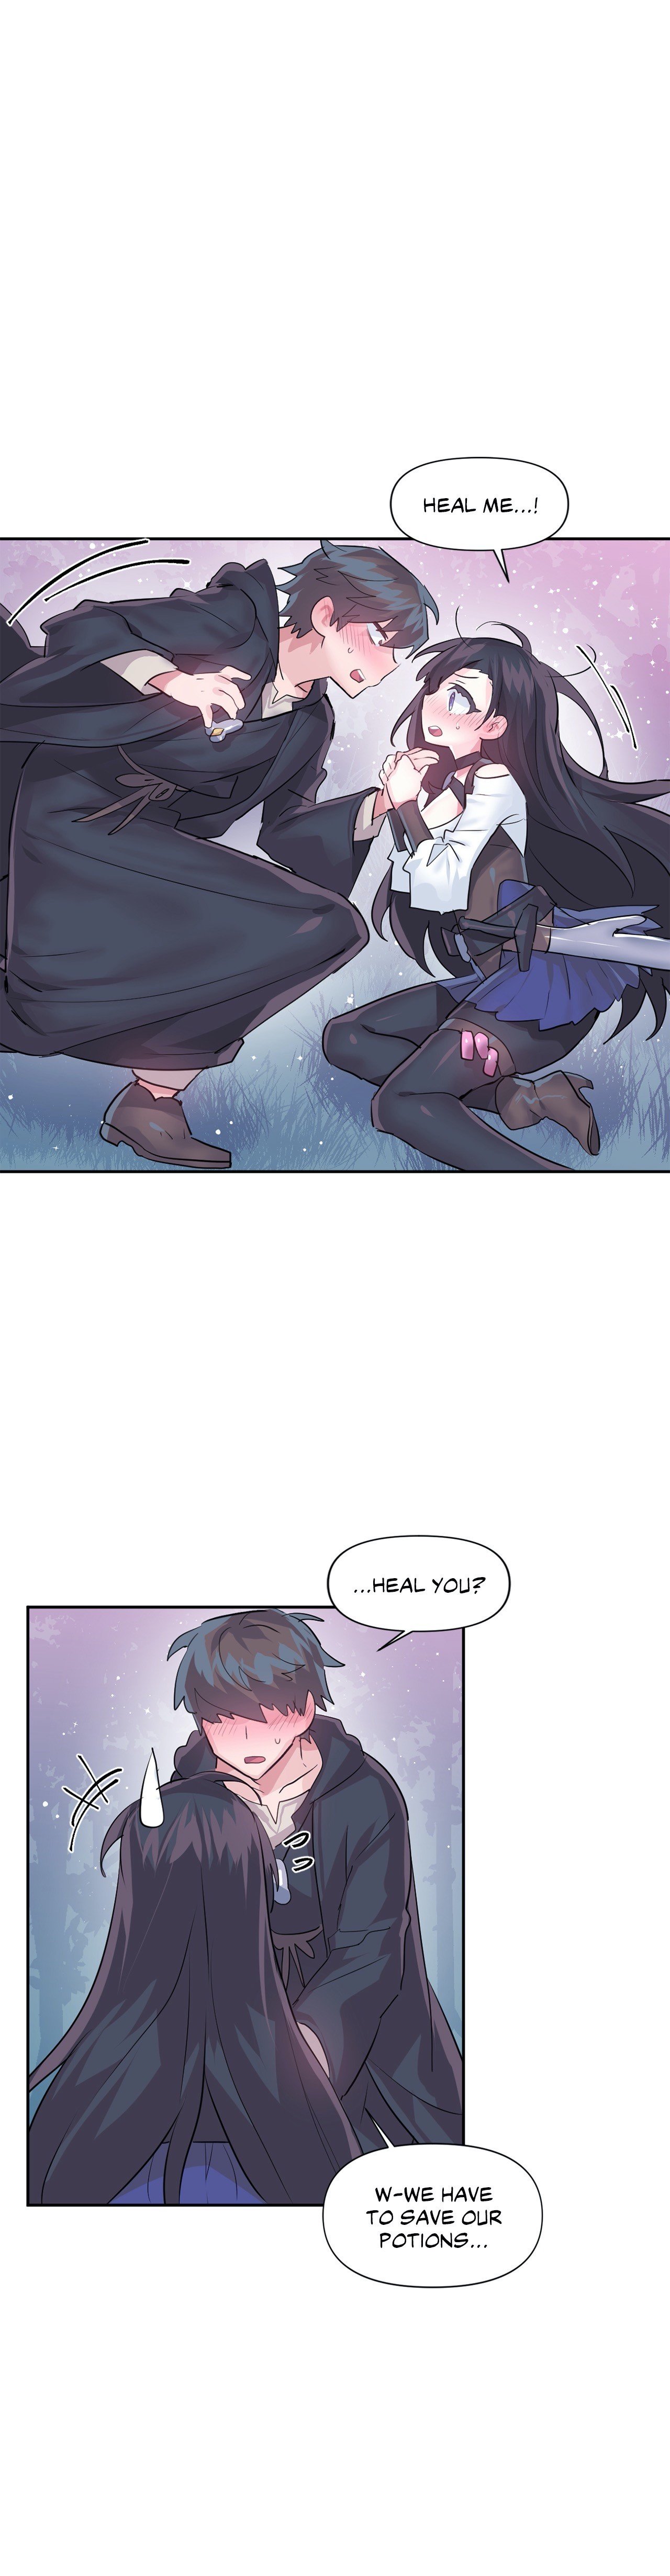 log-in-to-lust-a-land-chap-34-12